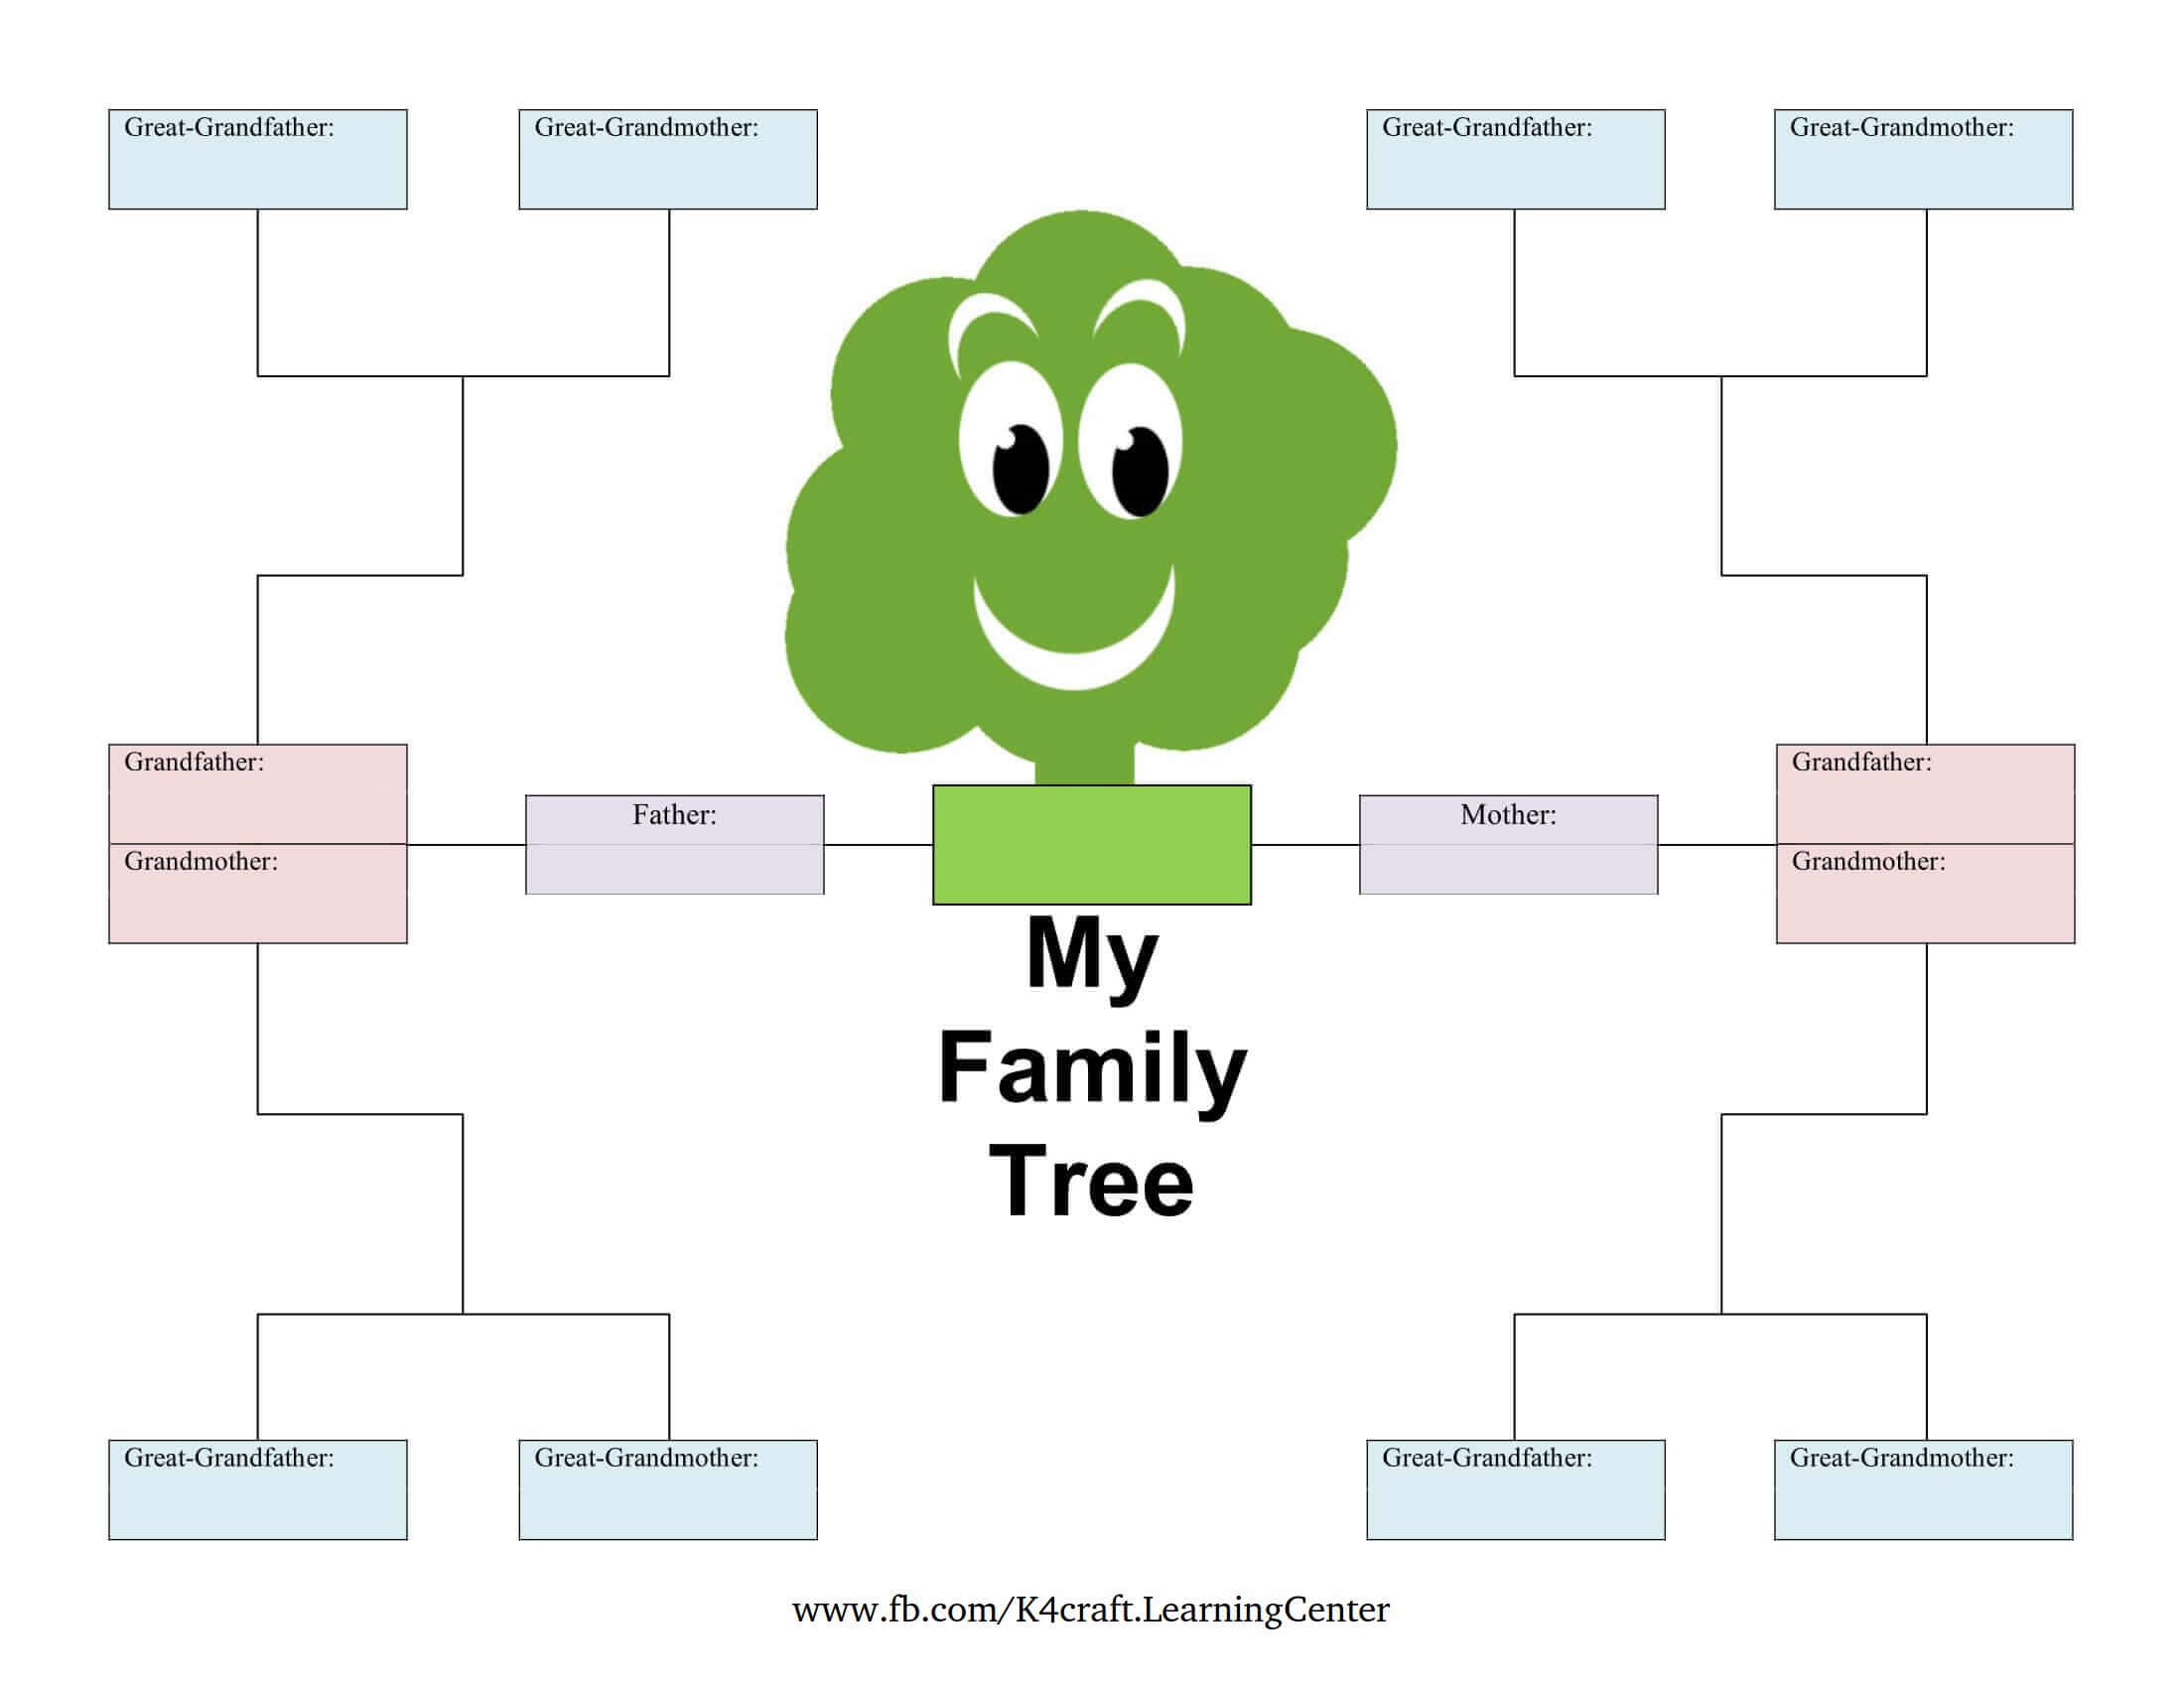 Father & Mother Family Tree Generation - Template For Kids - Family Tree Plans for Young Ones 